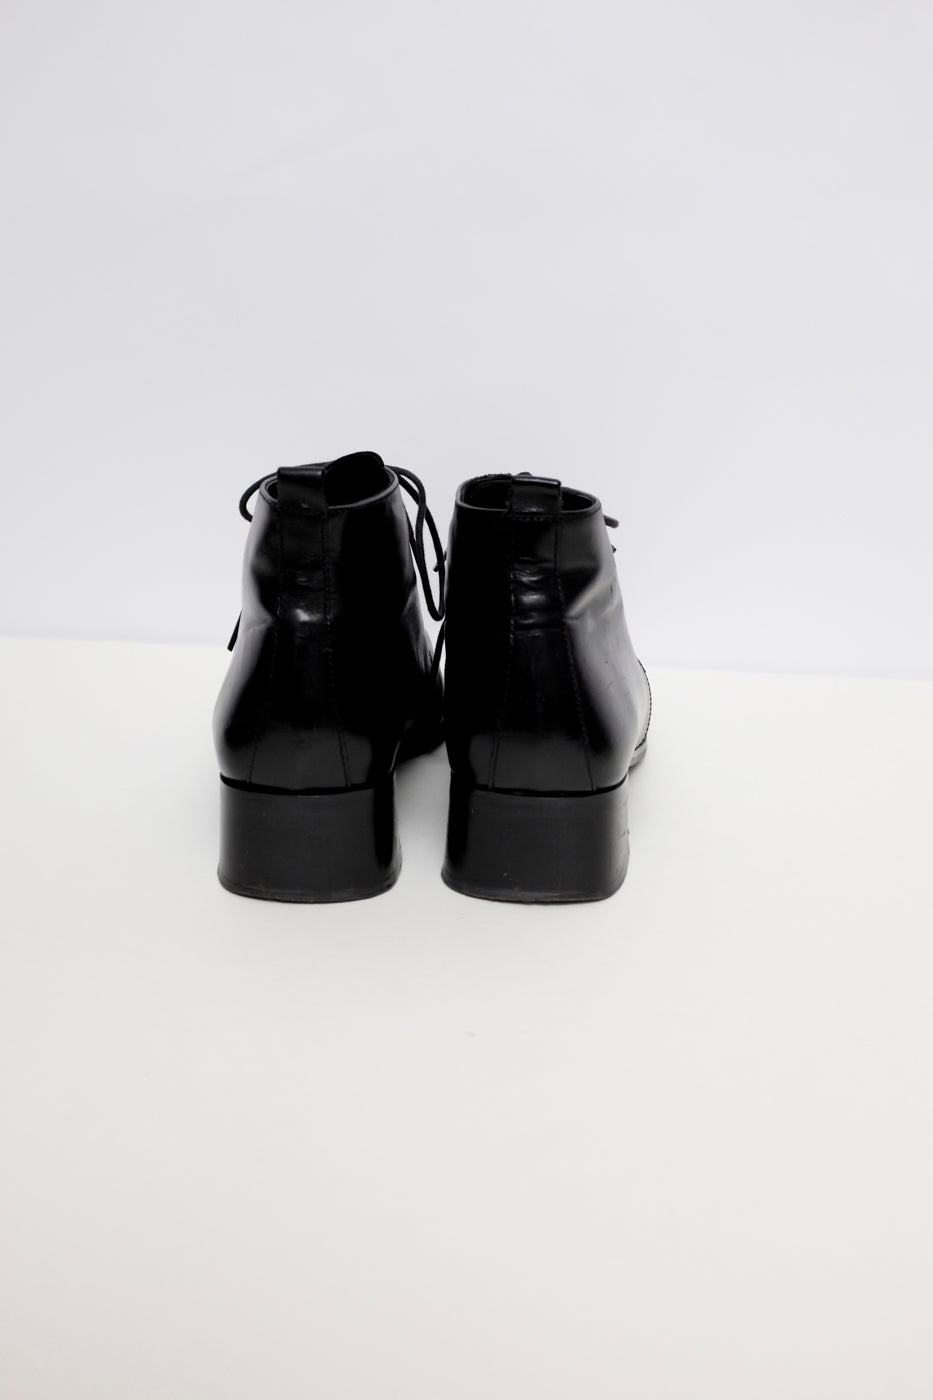 0017_BLACK LEATHER LACE UP 37 BOOTIES